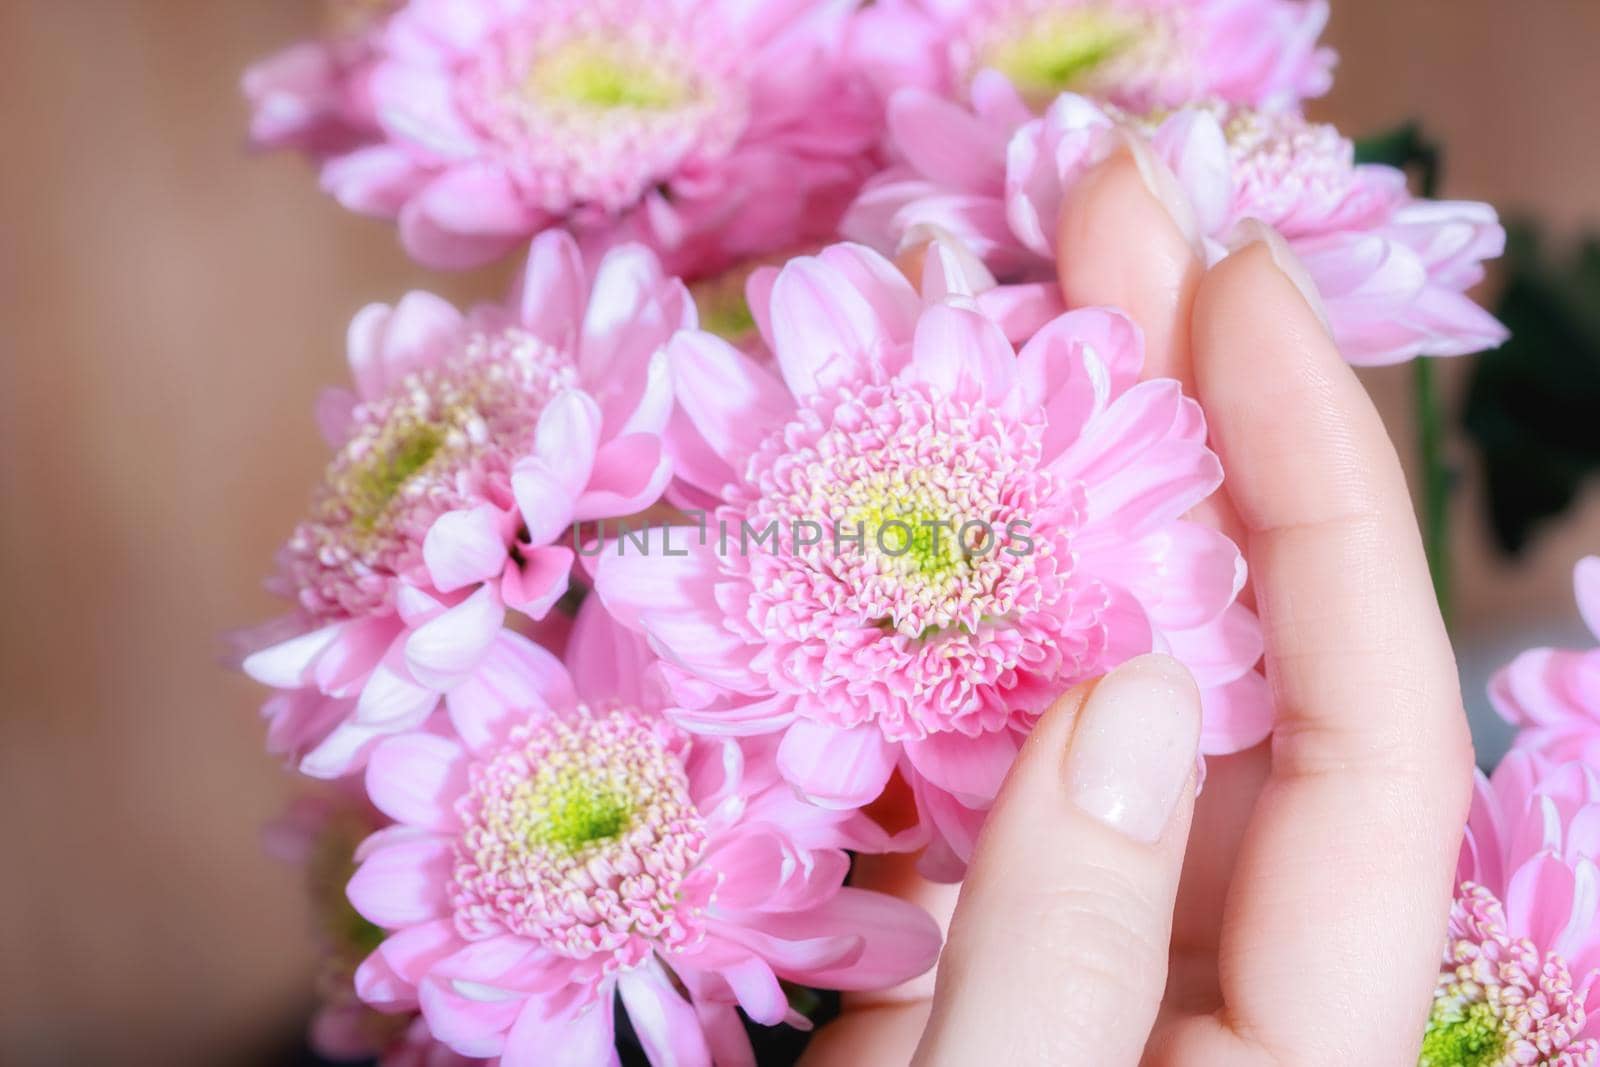 Woman hand hold bright pink chrysanthemumflowers by Estival